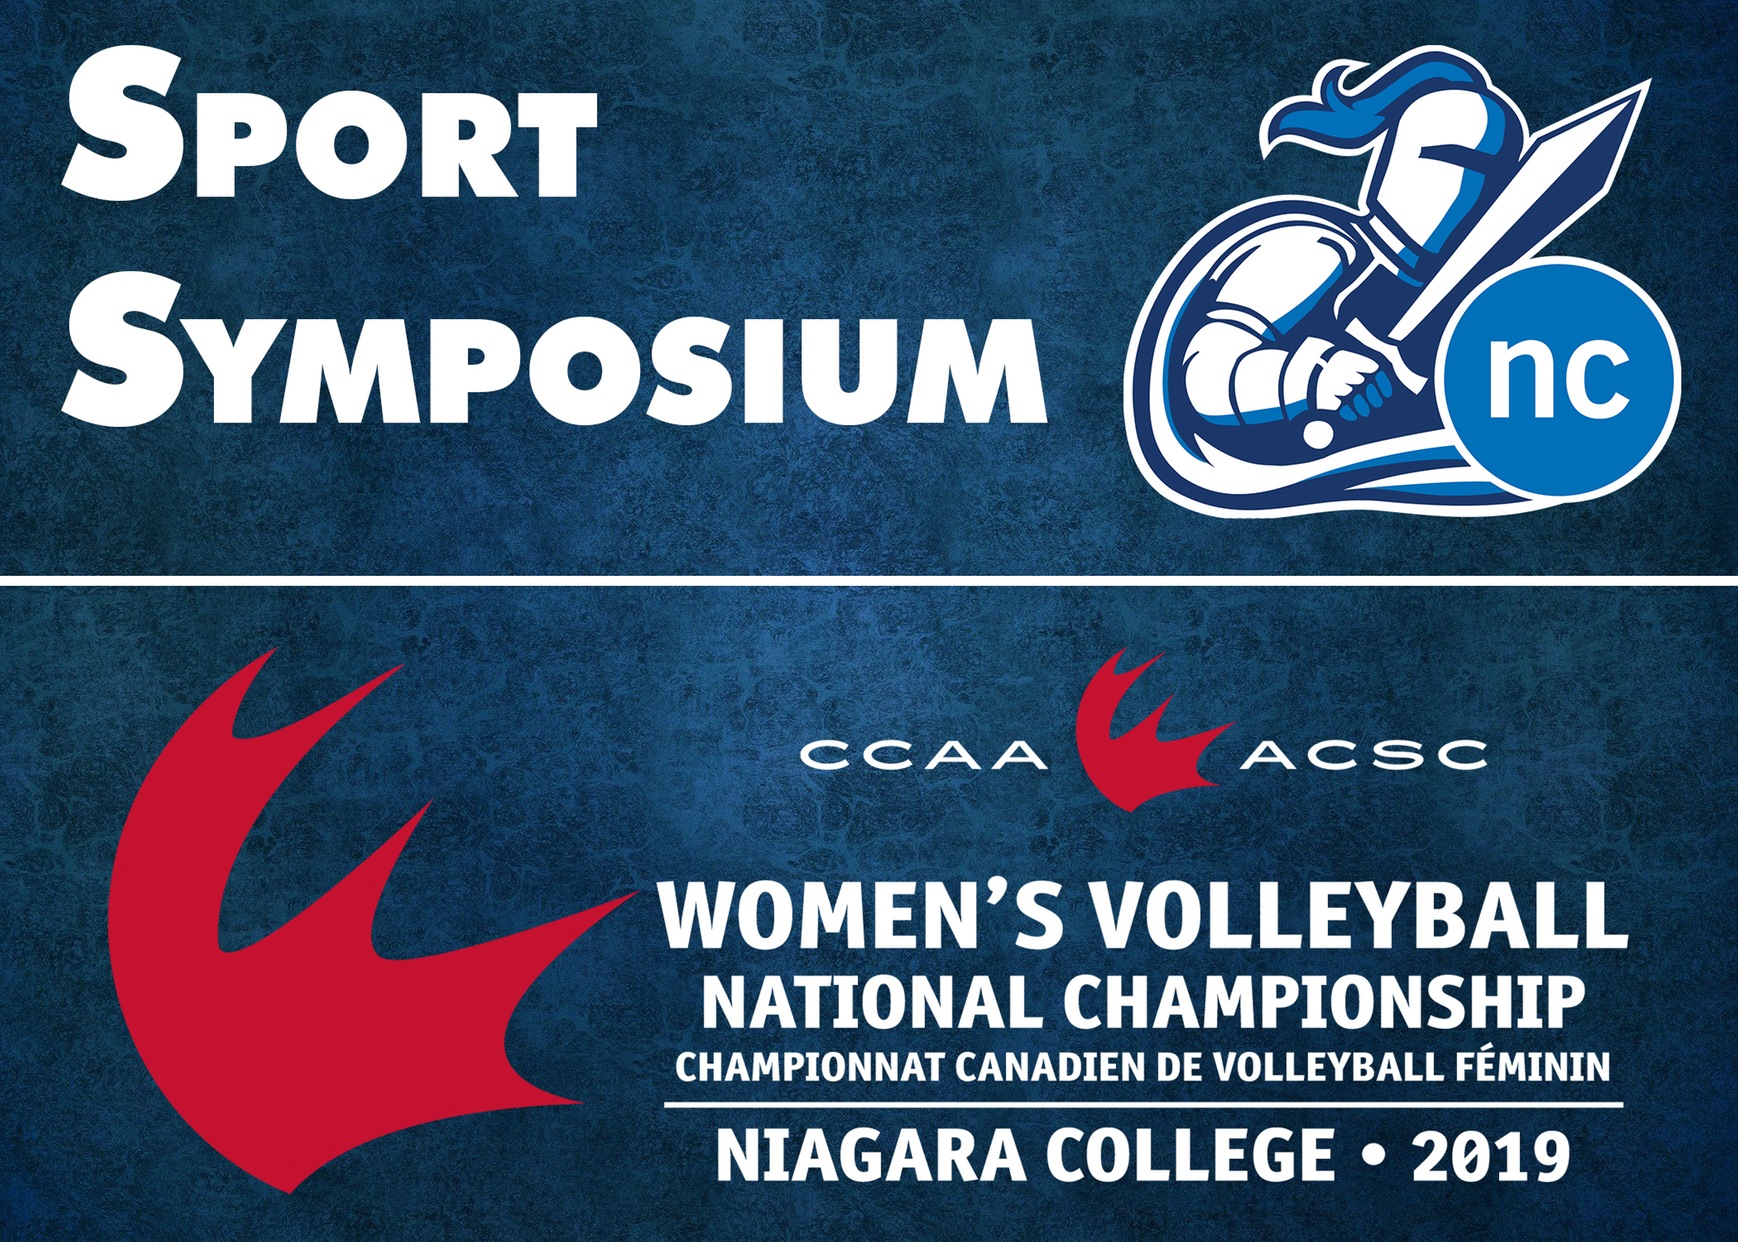 NEWS: Niagara College Sport Symposium to kick off the CCAA Women's Volleyball National Championship